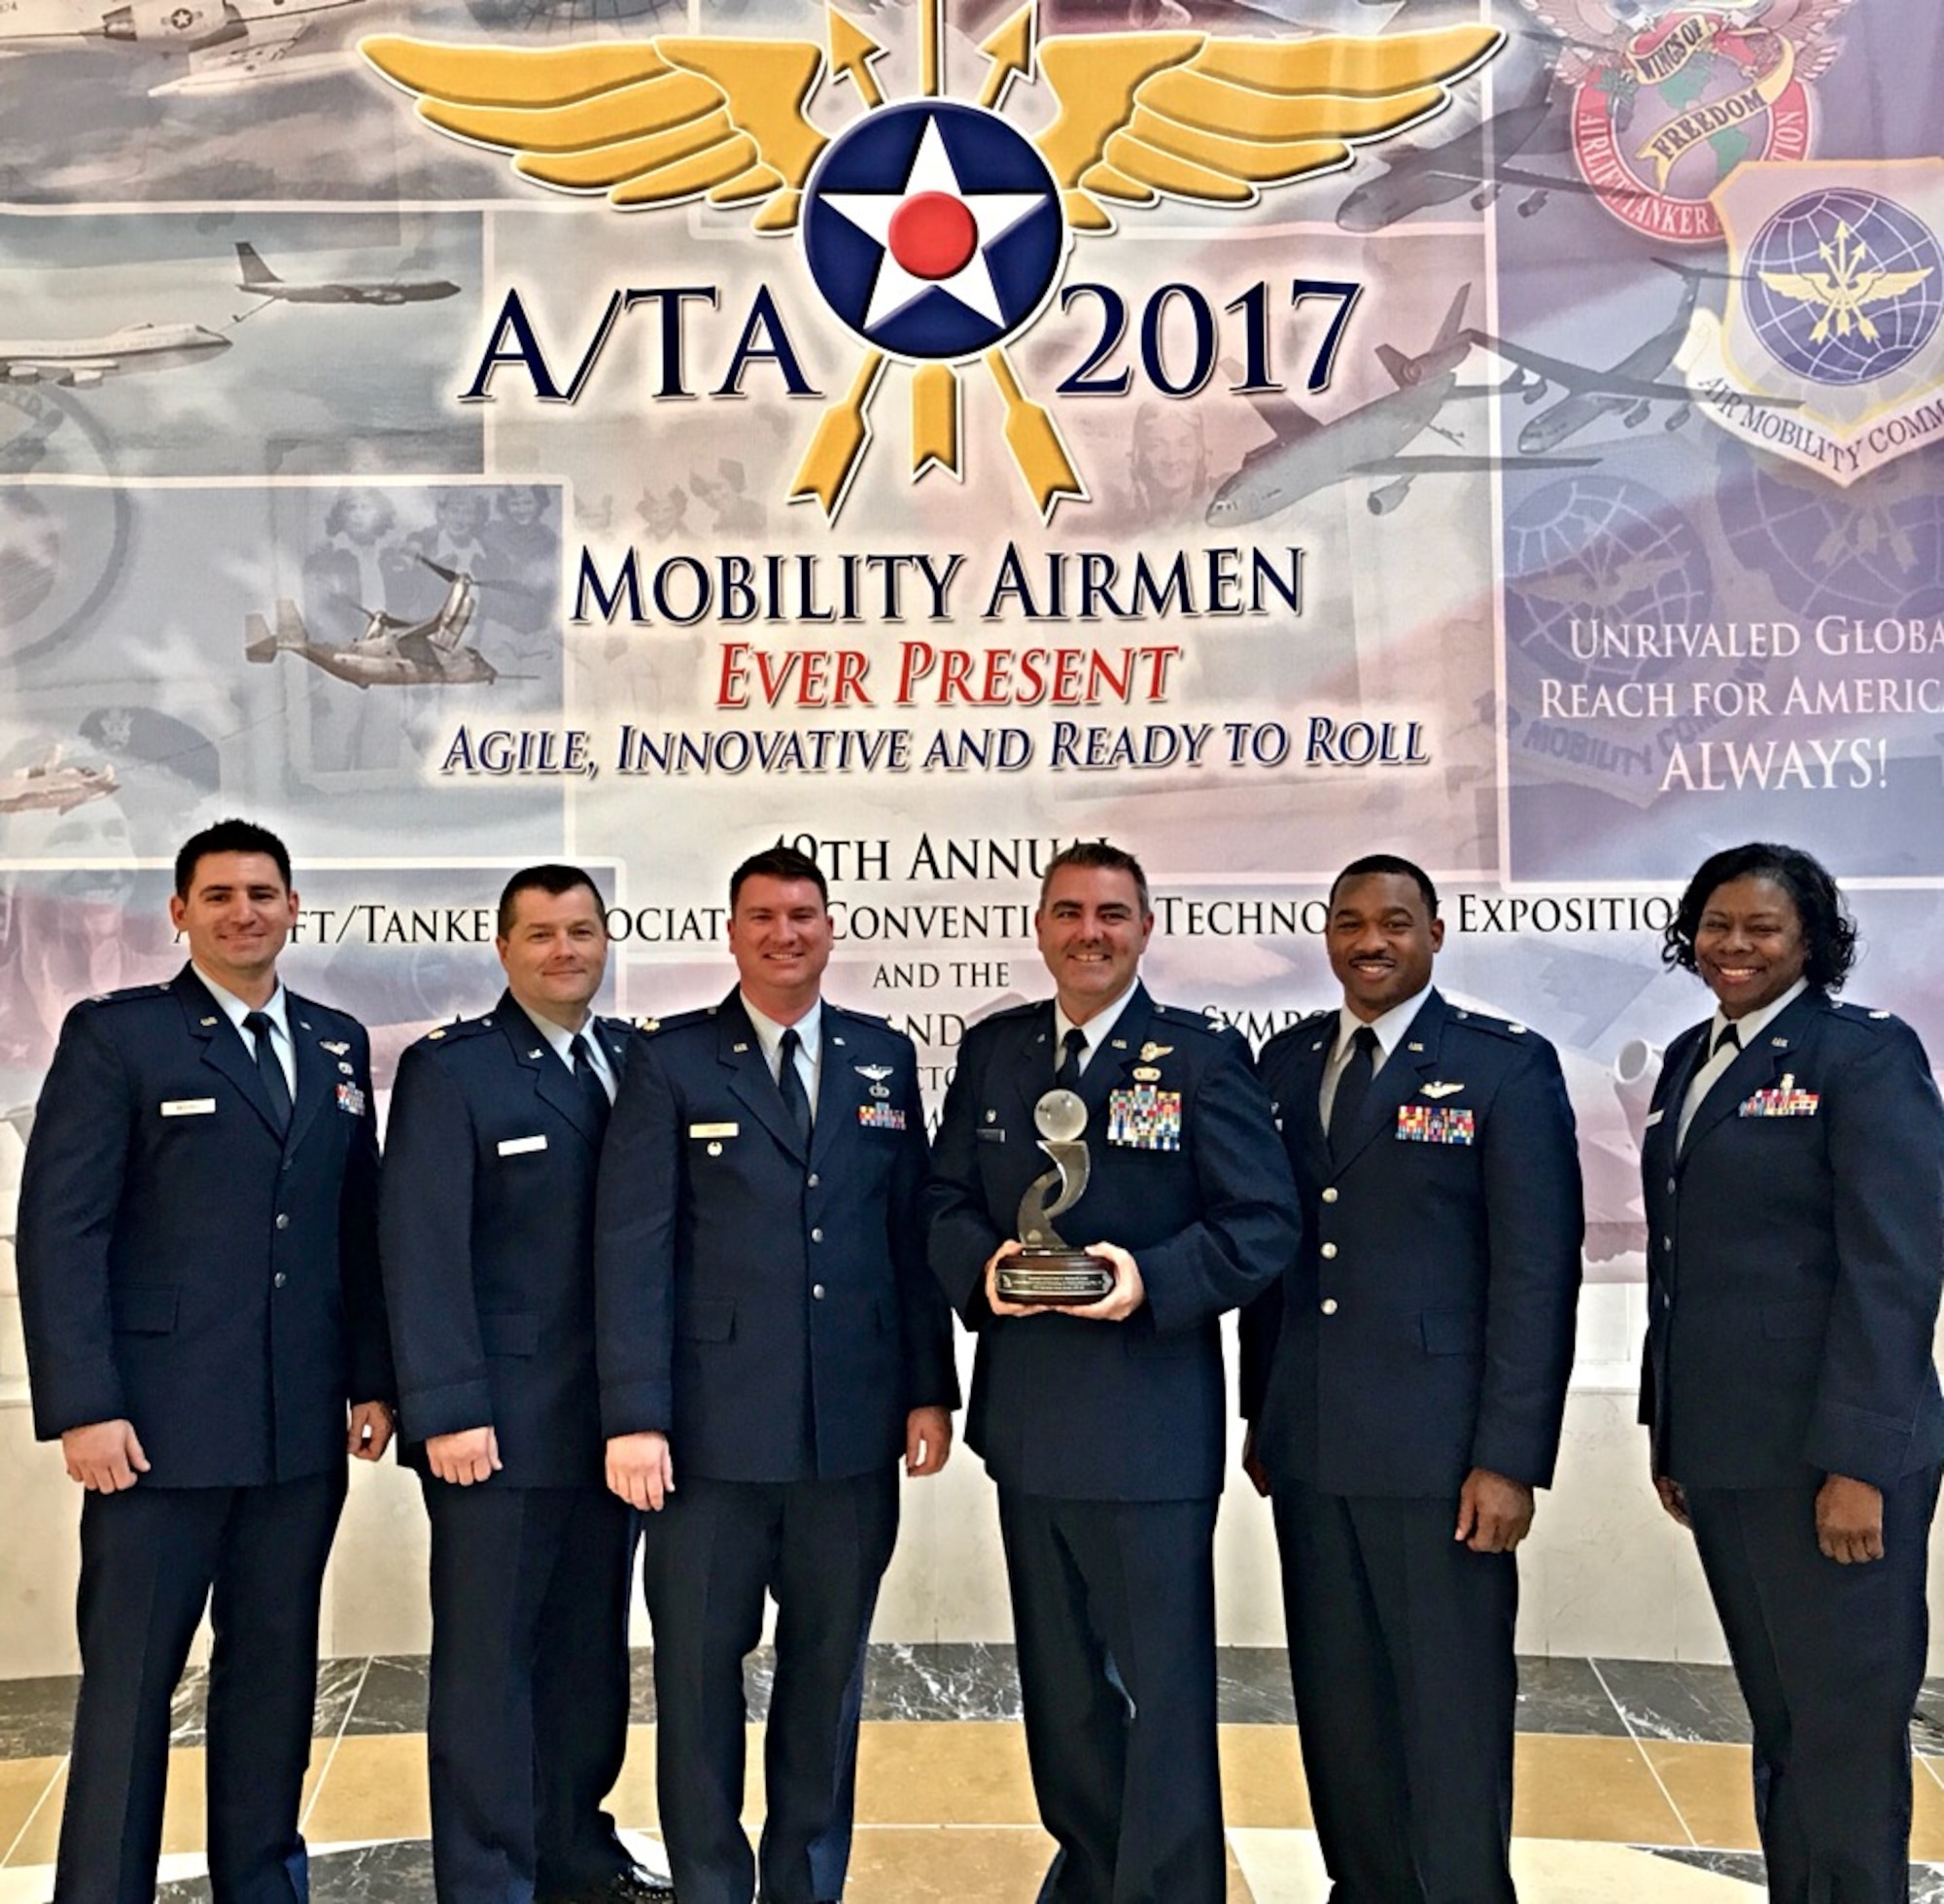 Members of the 403rd Operations Group accept the Airlift/Tanker Association's Lt. Gen. James E. Sherrard III Air Force Reserve Command Outstanding Unit Award. his award is presented annually to the most outstanding Air Force Reserve wing or group that distinguished itself in the performance and support of the Mobility Air Forces mission. (U.S. Air Force photo)